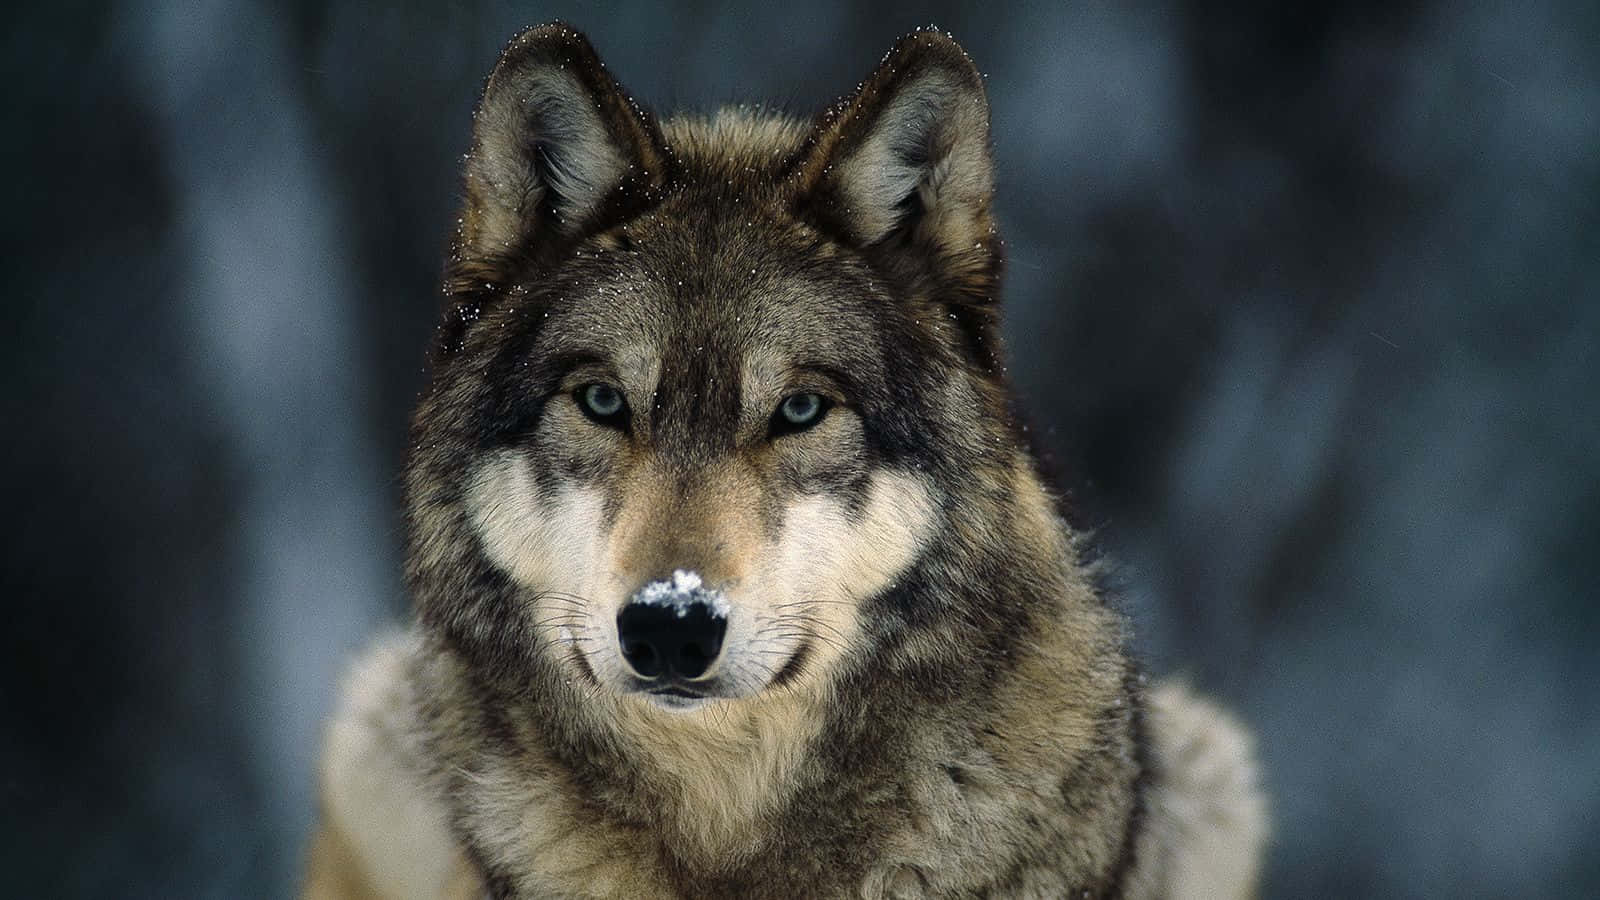 Caption: Majestic Gray Wolf in the Wilderness Wallpaper